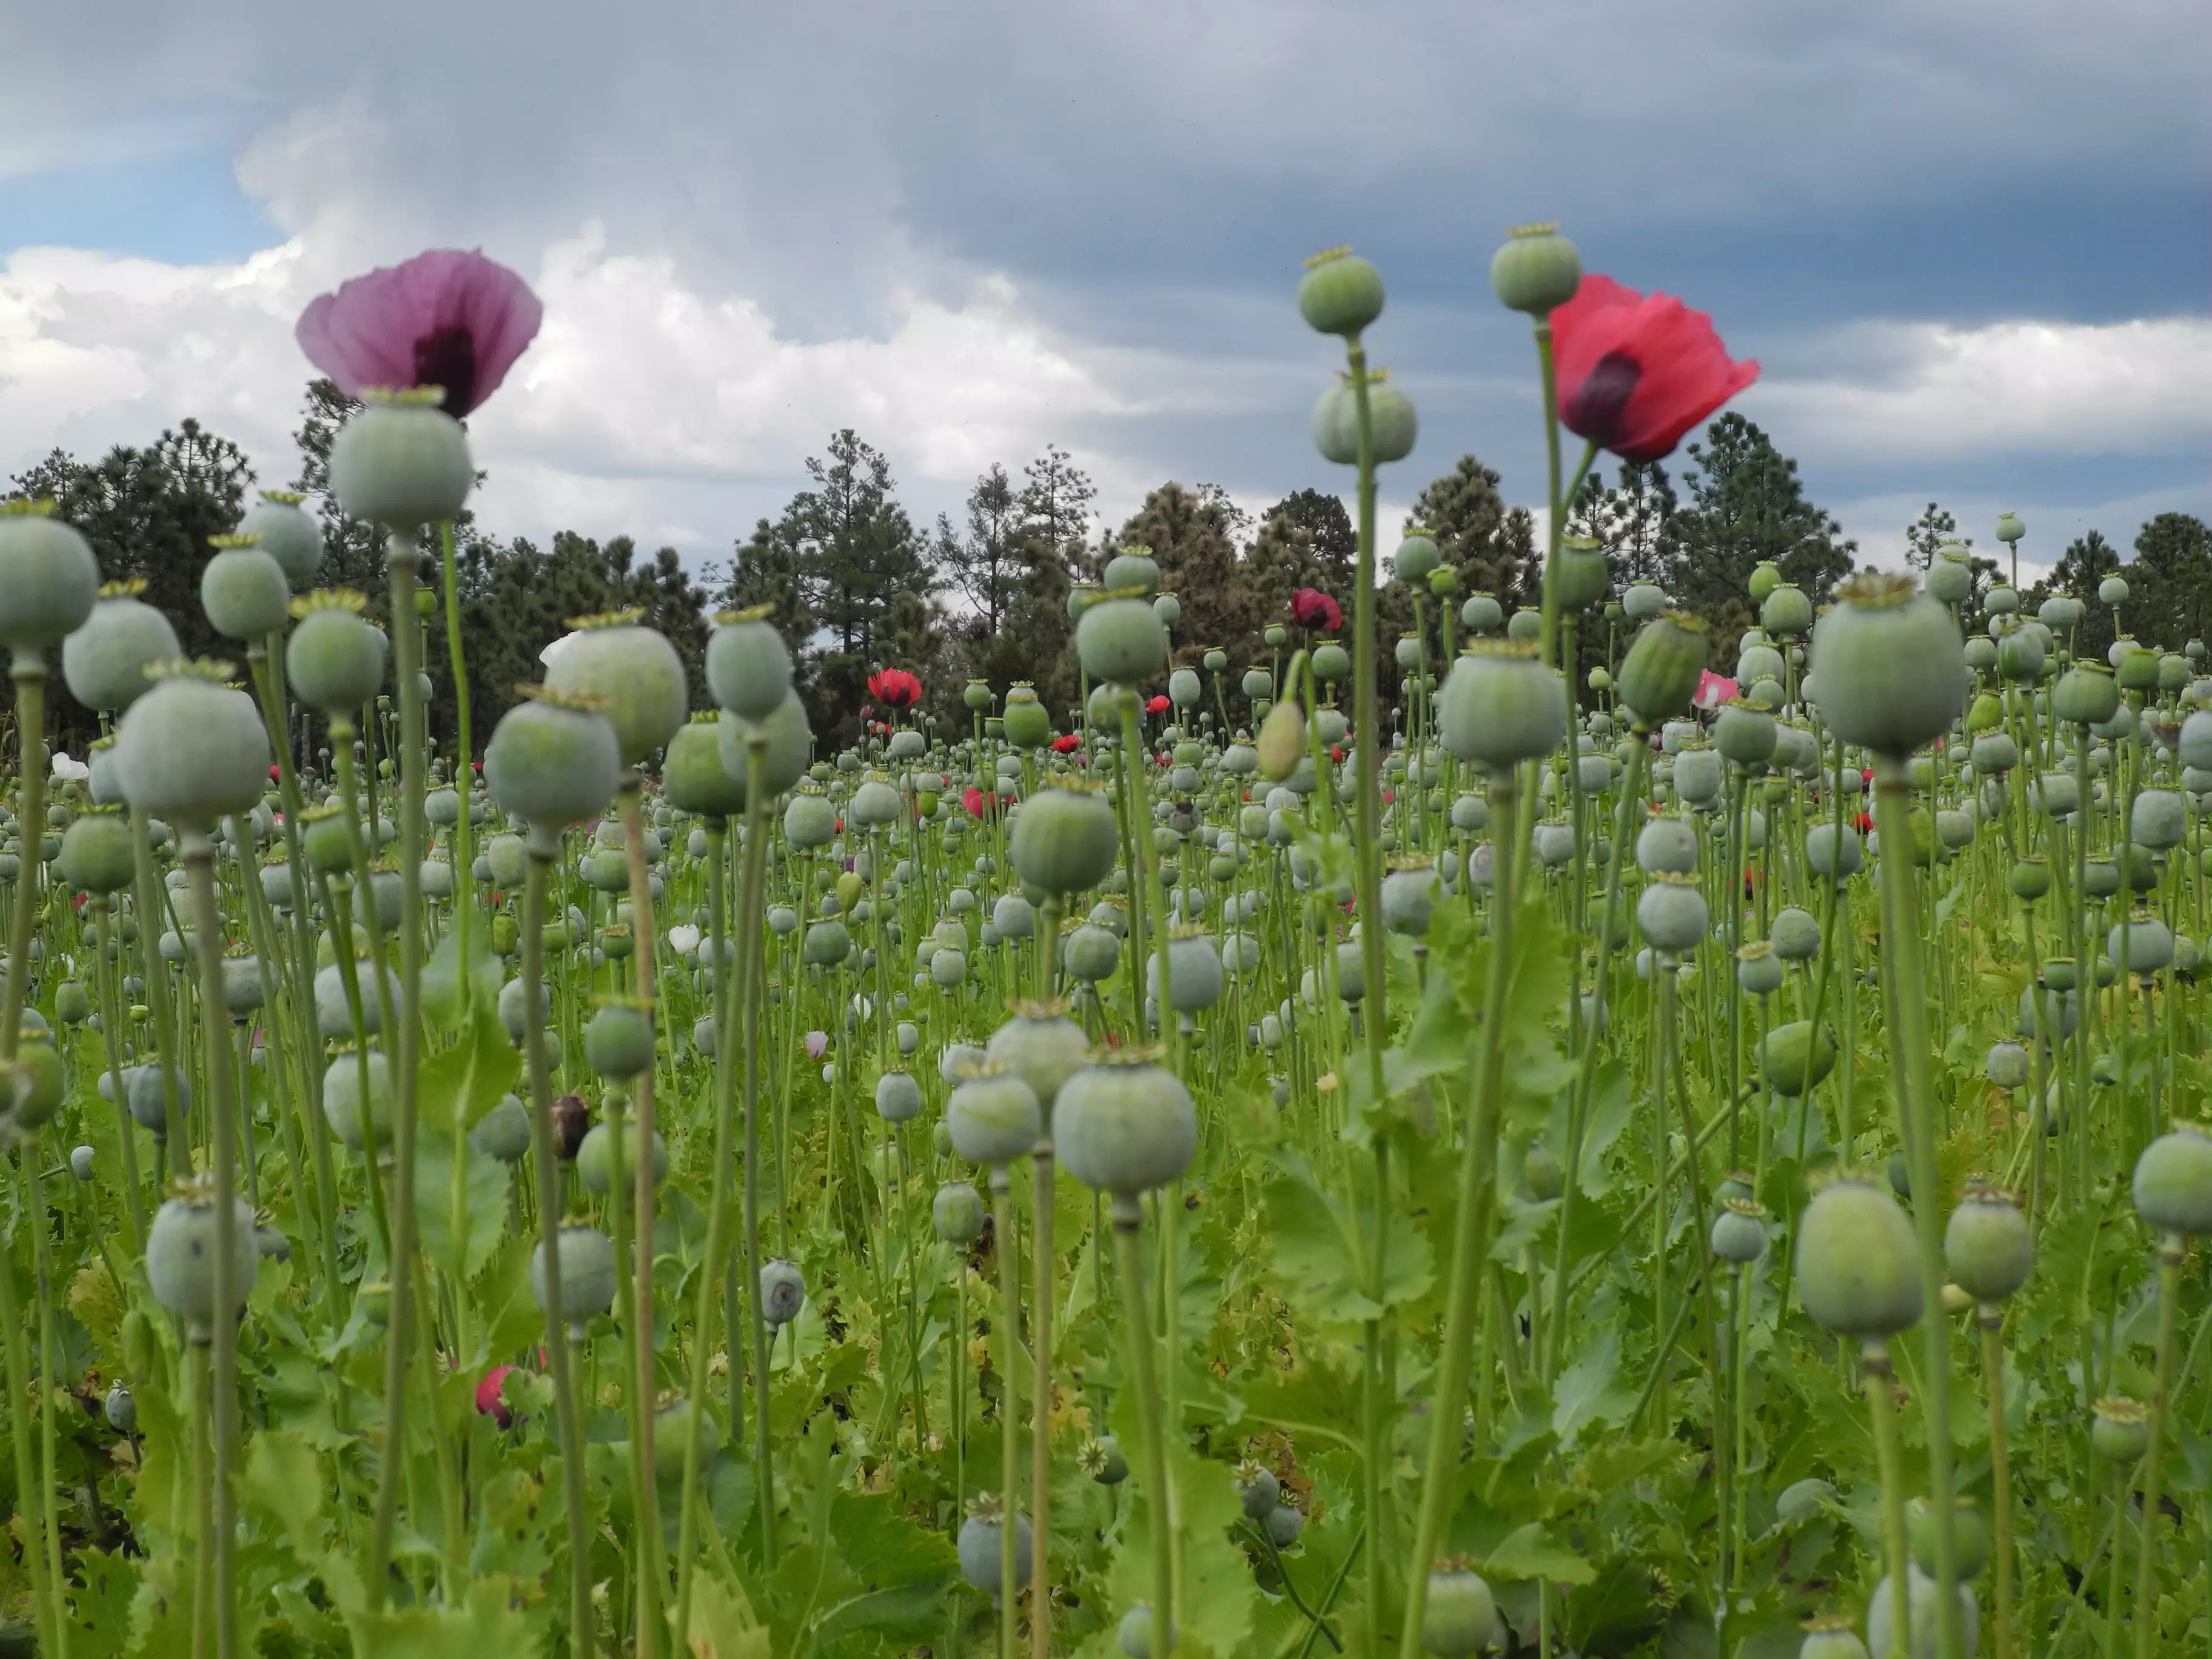 Opium farms are an expensive business with cultivators requiring a licence.